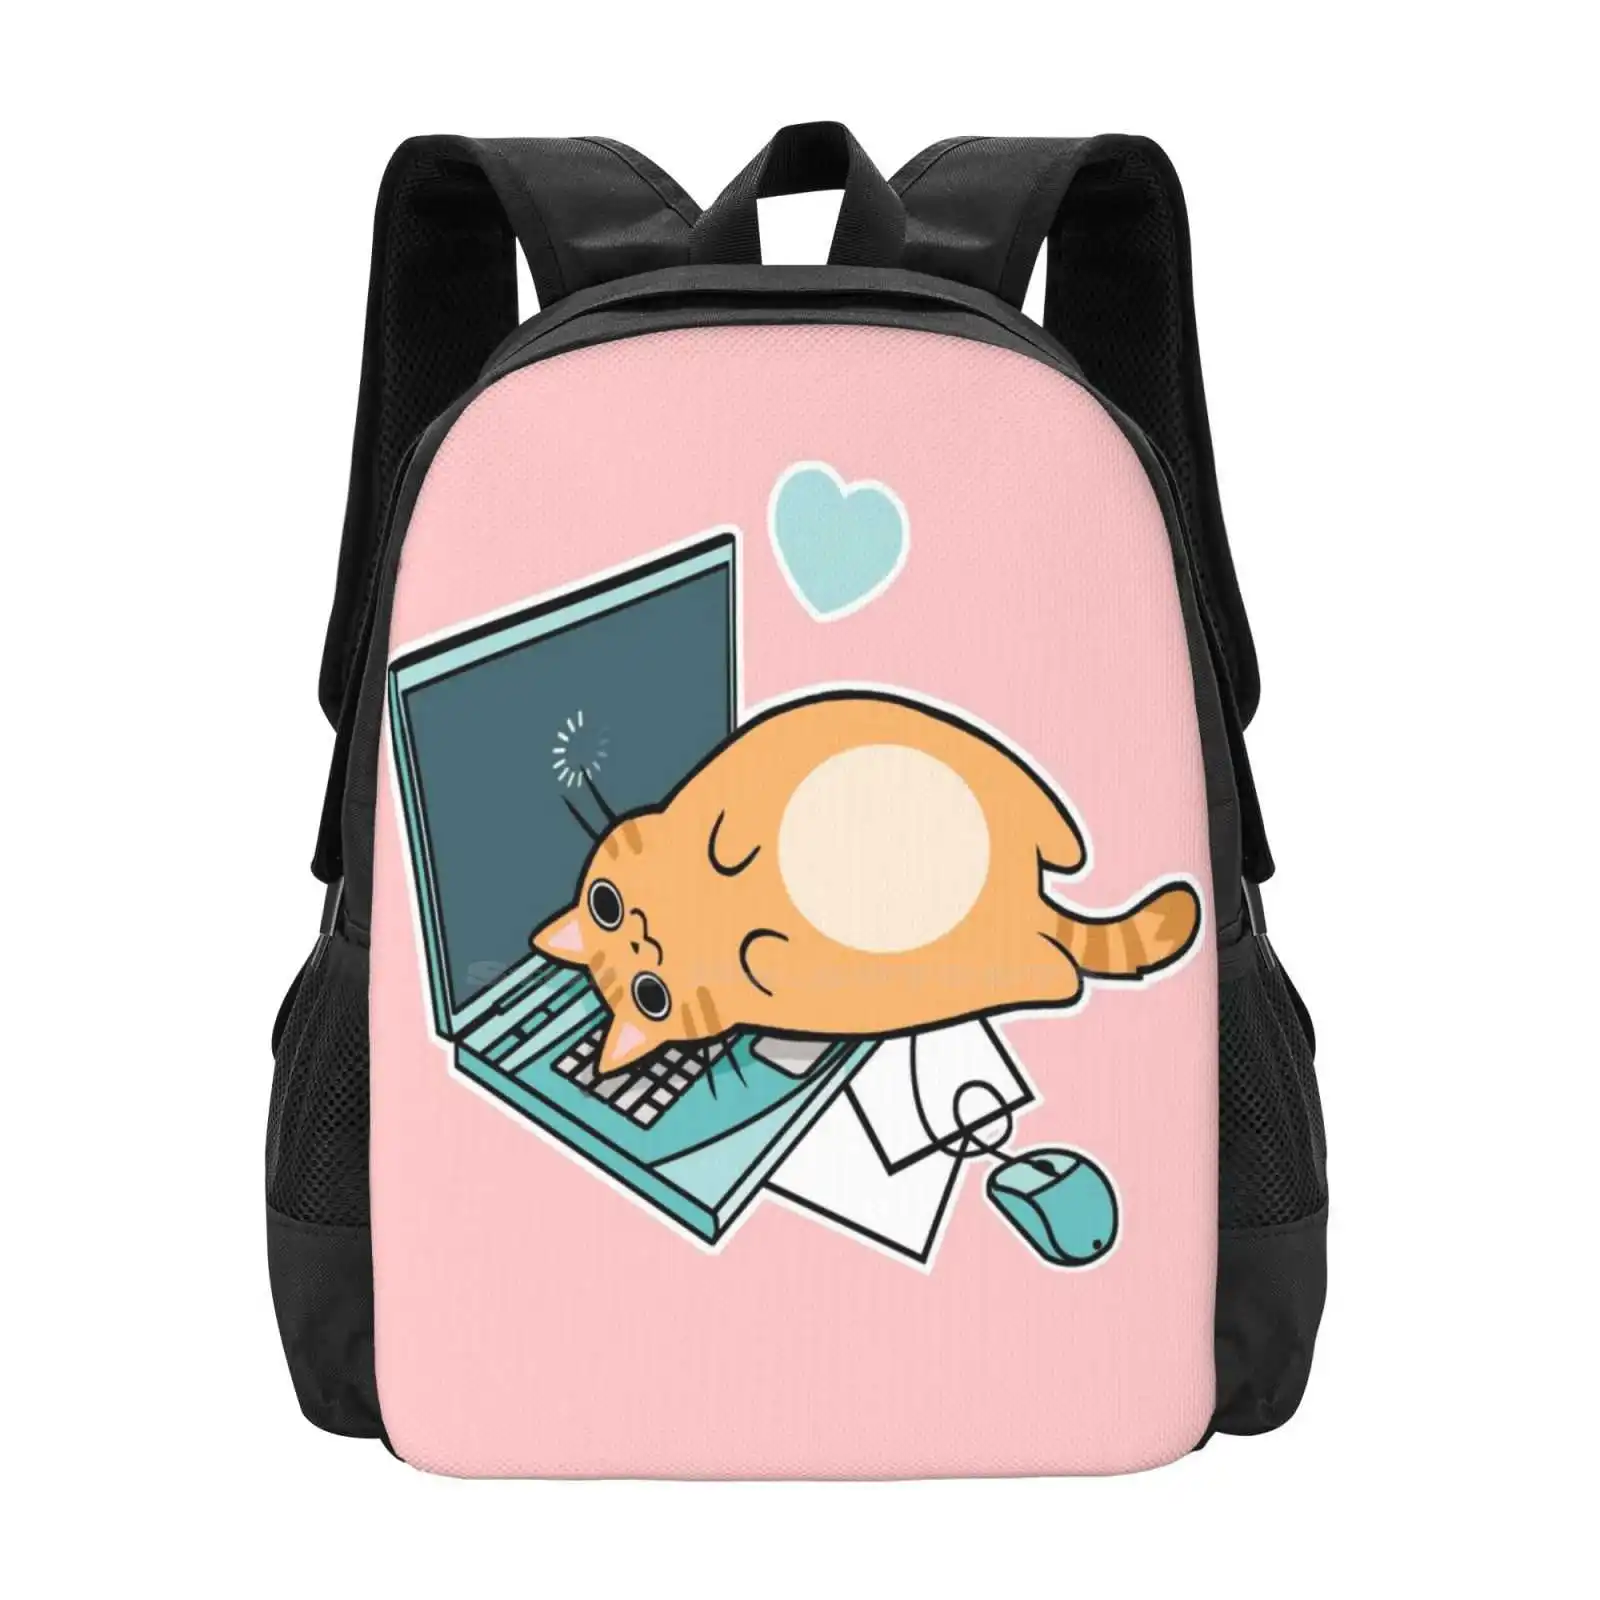 

Cute Laptop Cat New Arrivals Unisex Bags Student Bag Backpack Cat Kitten Kitty Laptop Computer Cute Adorable Funny Love Lovable